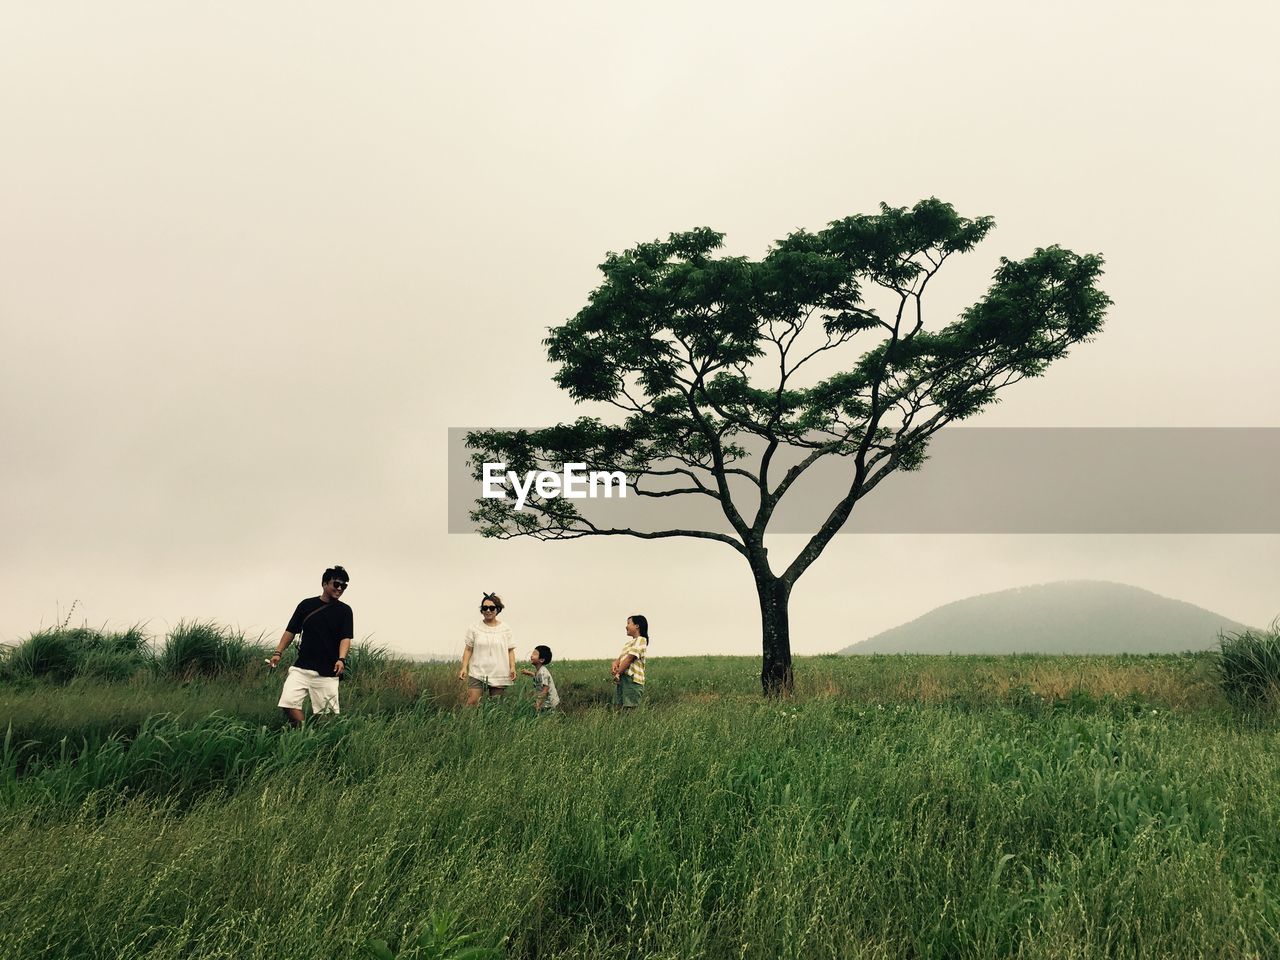 Family walking on grassy land against clear sky